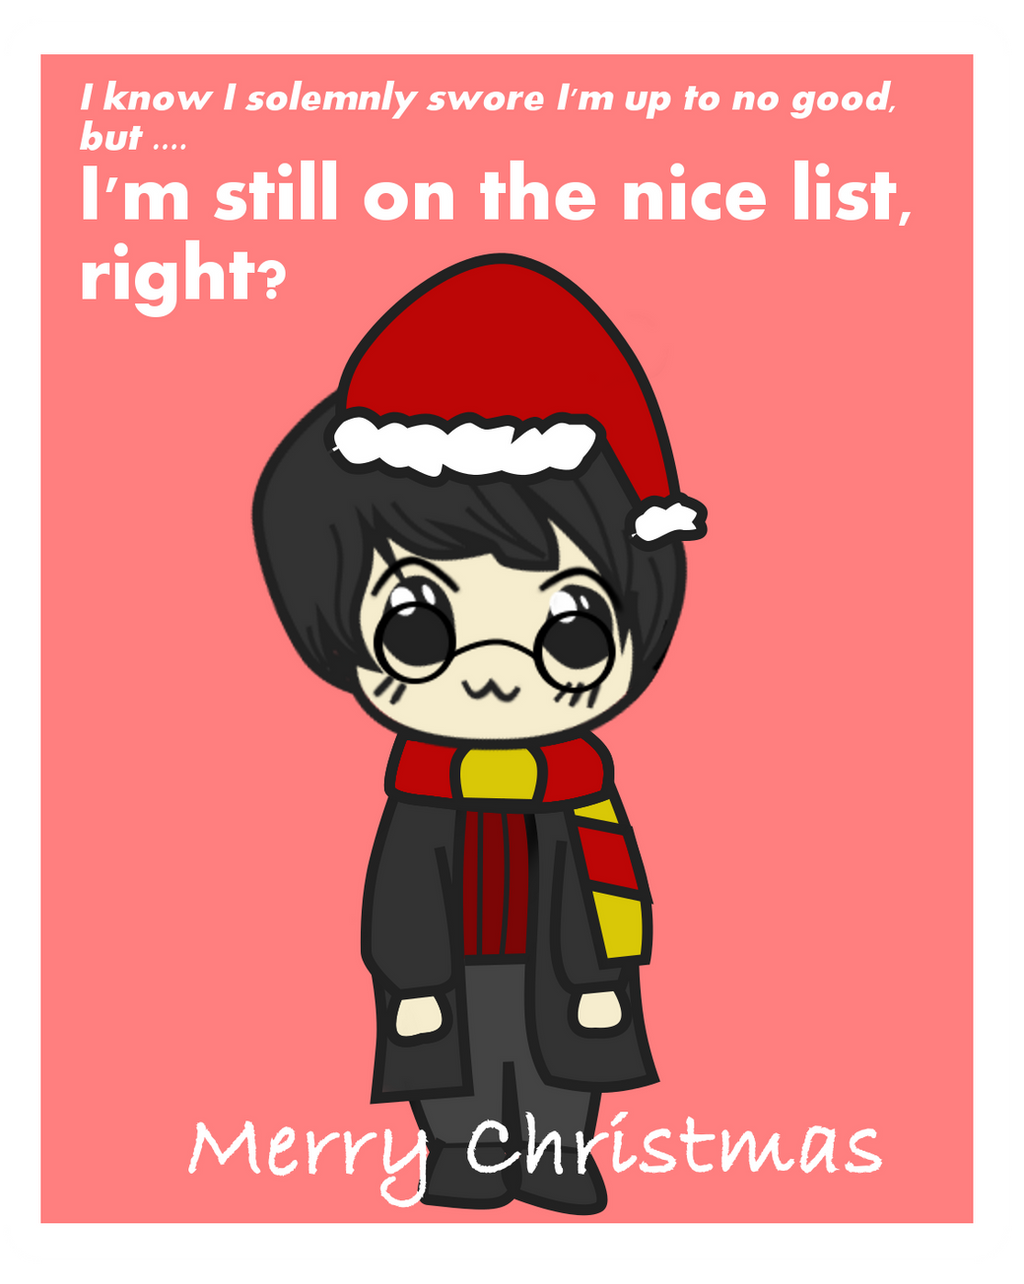 http://img12.deviantart.net/fb55/i/2015/357/6/2/harry_potter_christmas_greetings_by_talesaboutus-d9l6b89.png